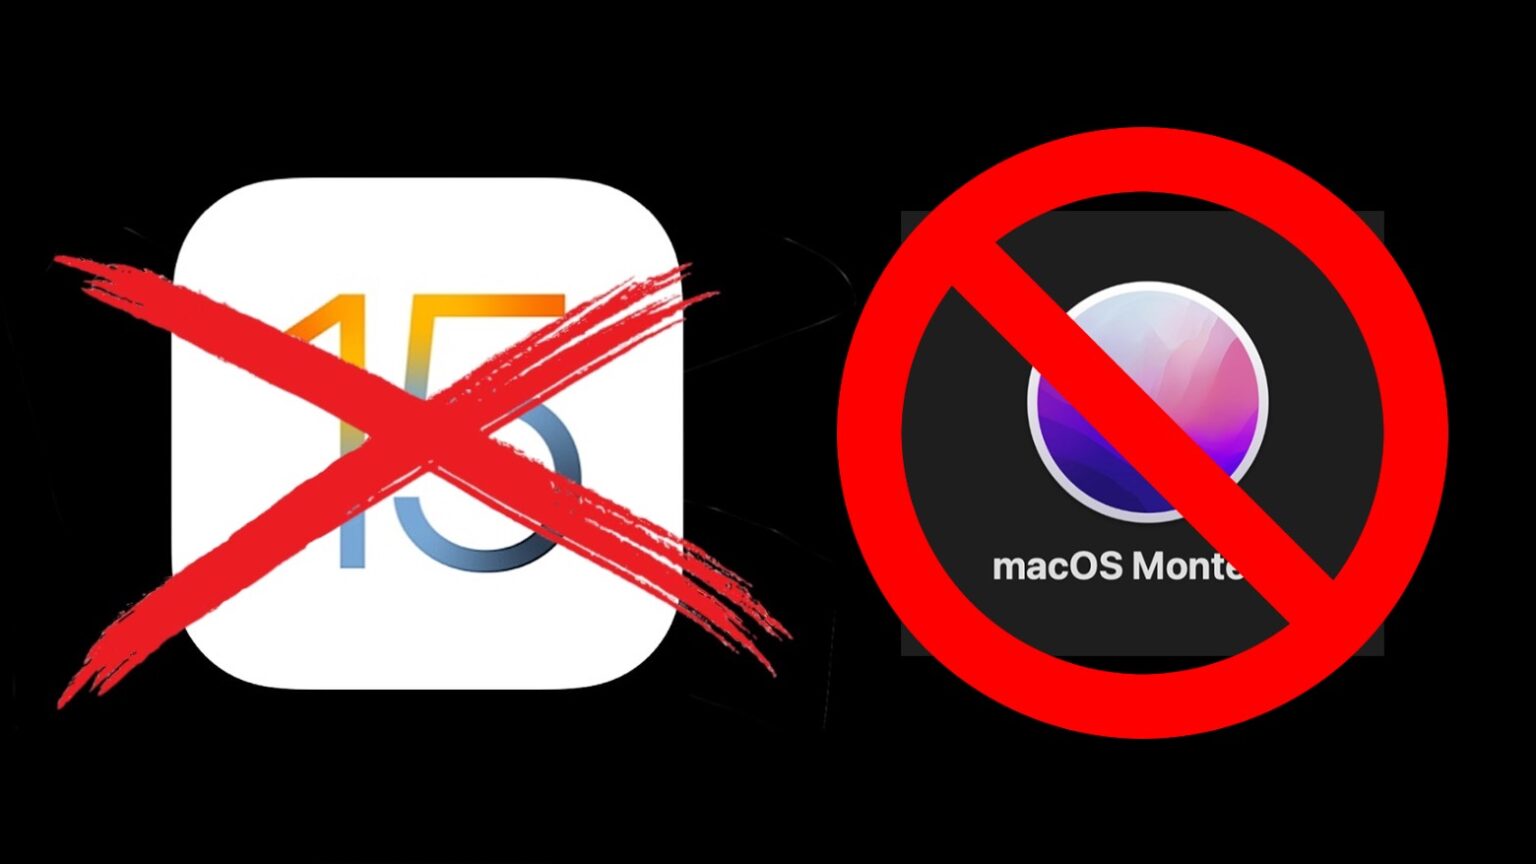 Let’s hope Apple already put iOS 15 and macOS Monterey on the shelf